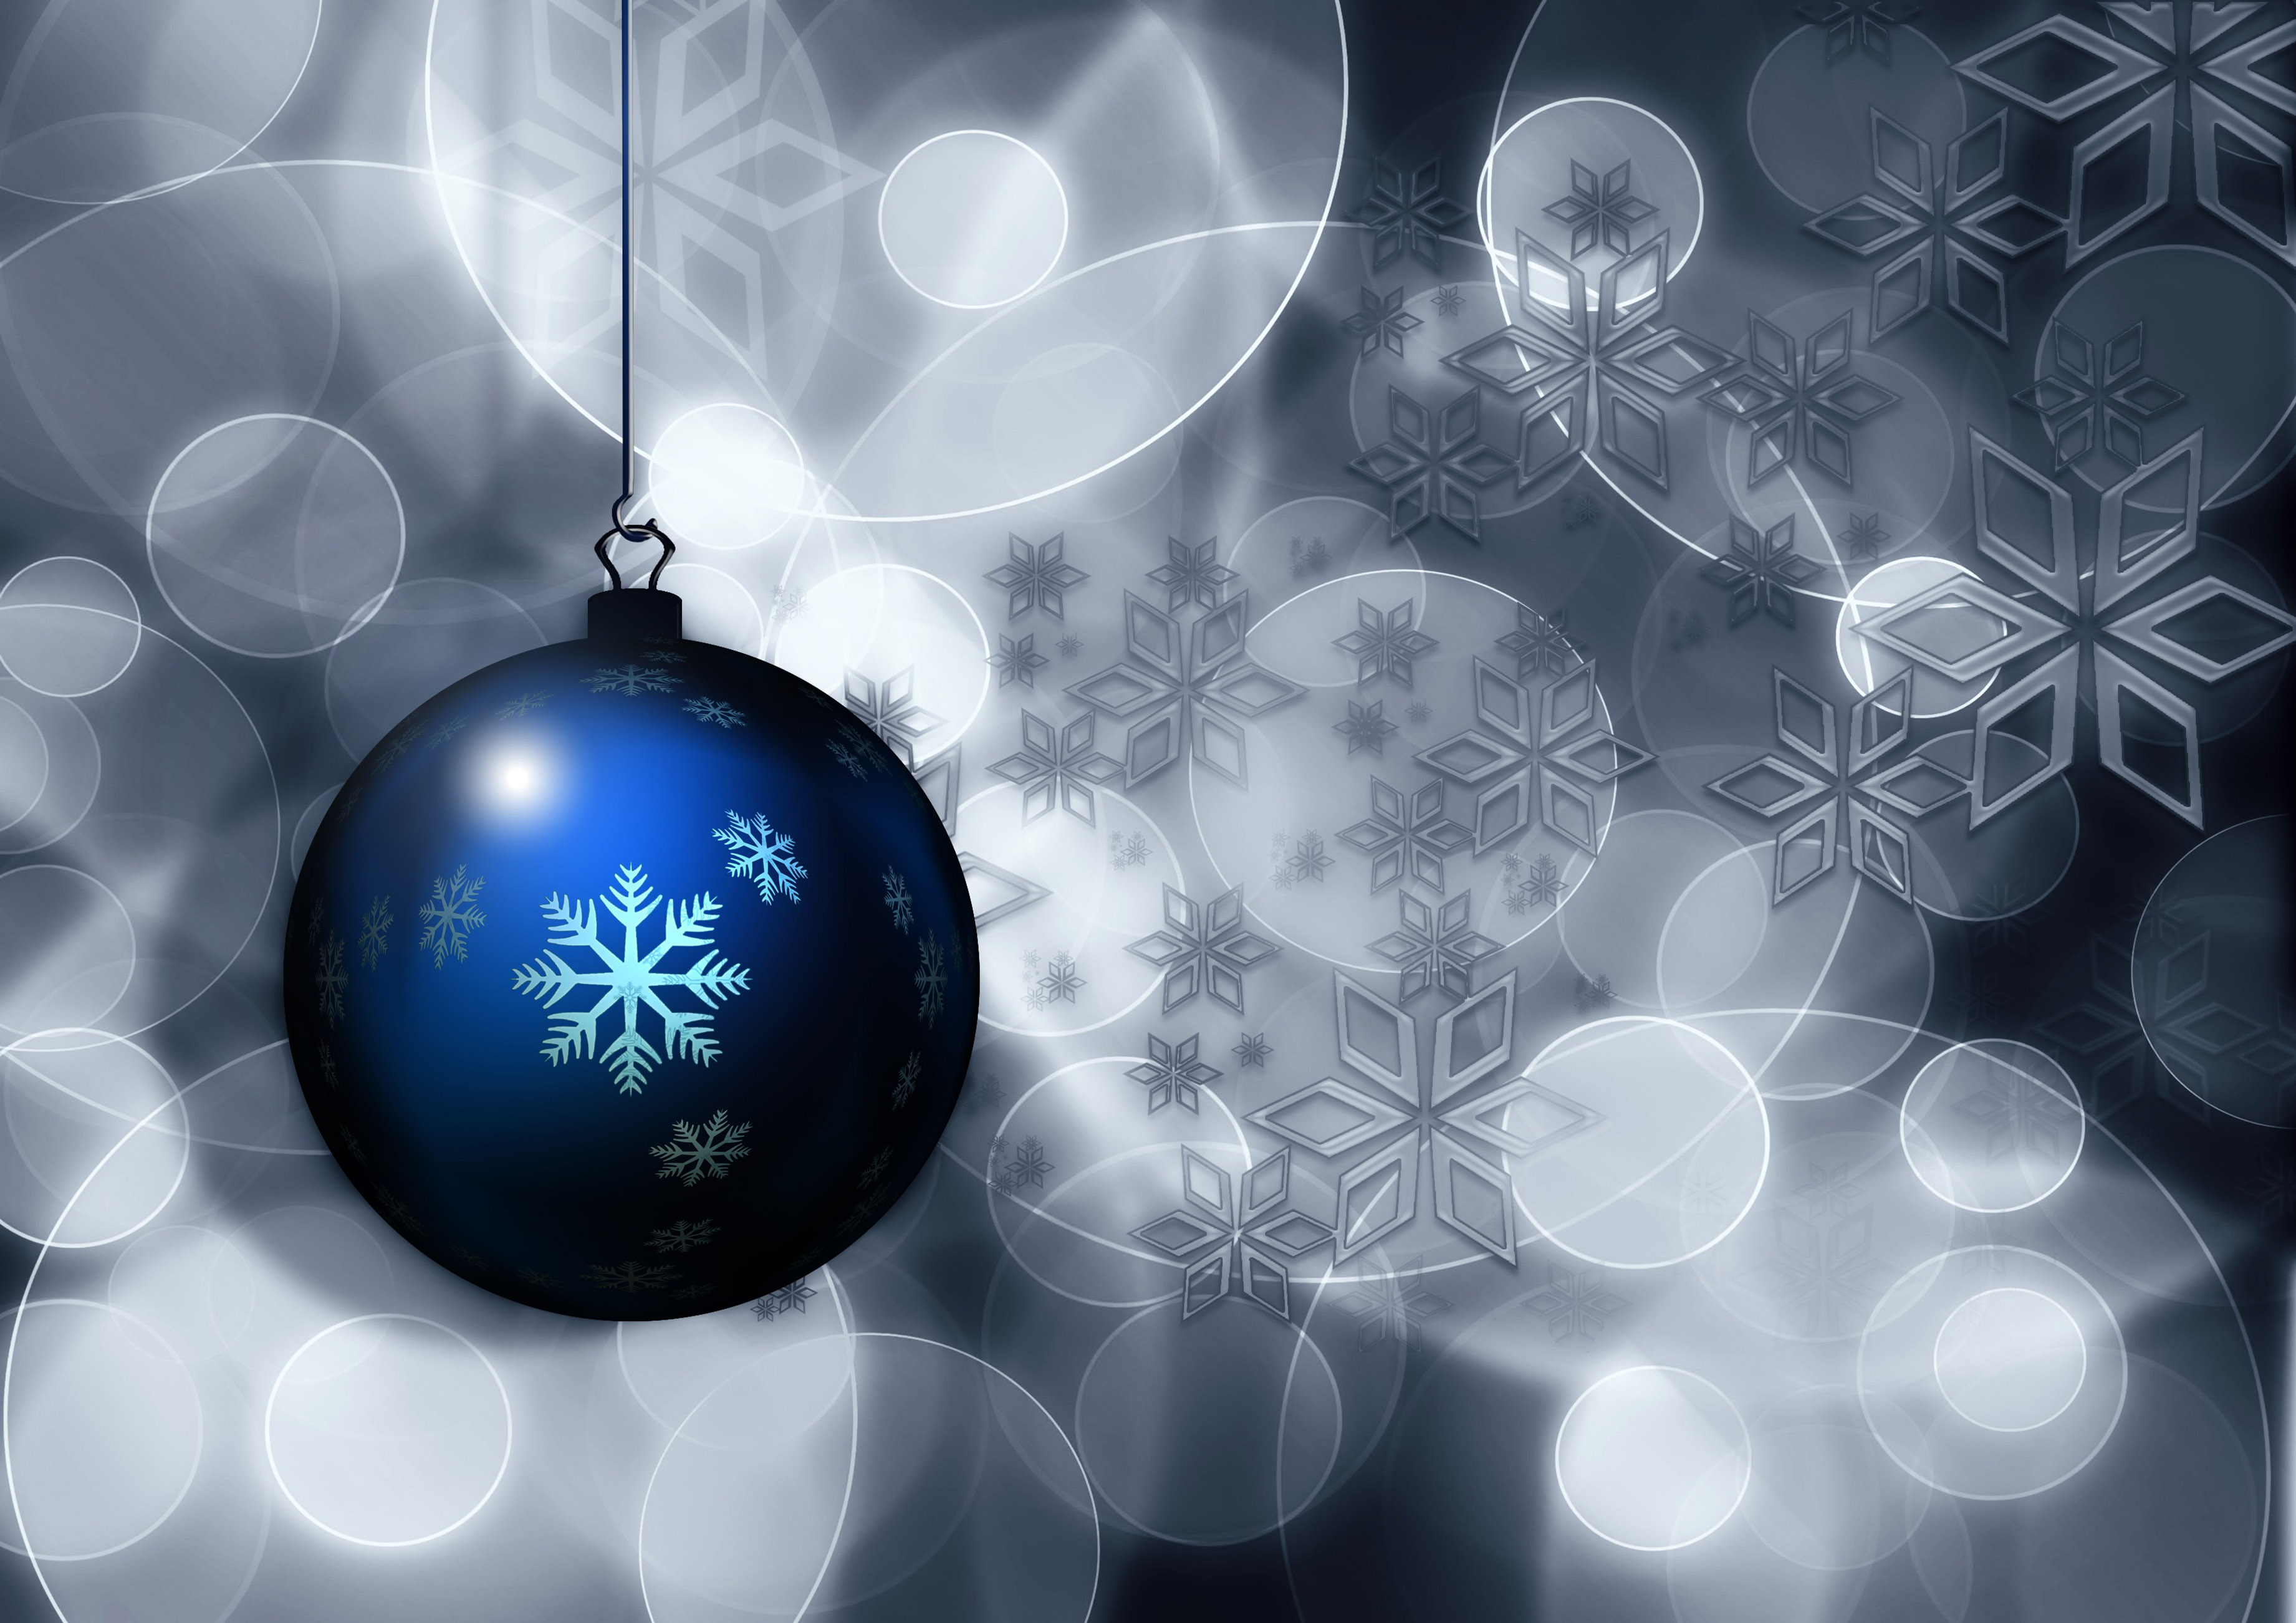 More Ball Decoration for a Free Christmas Wallpaper and Christmas Background Image